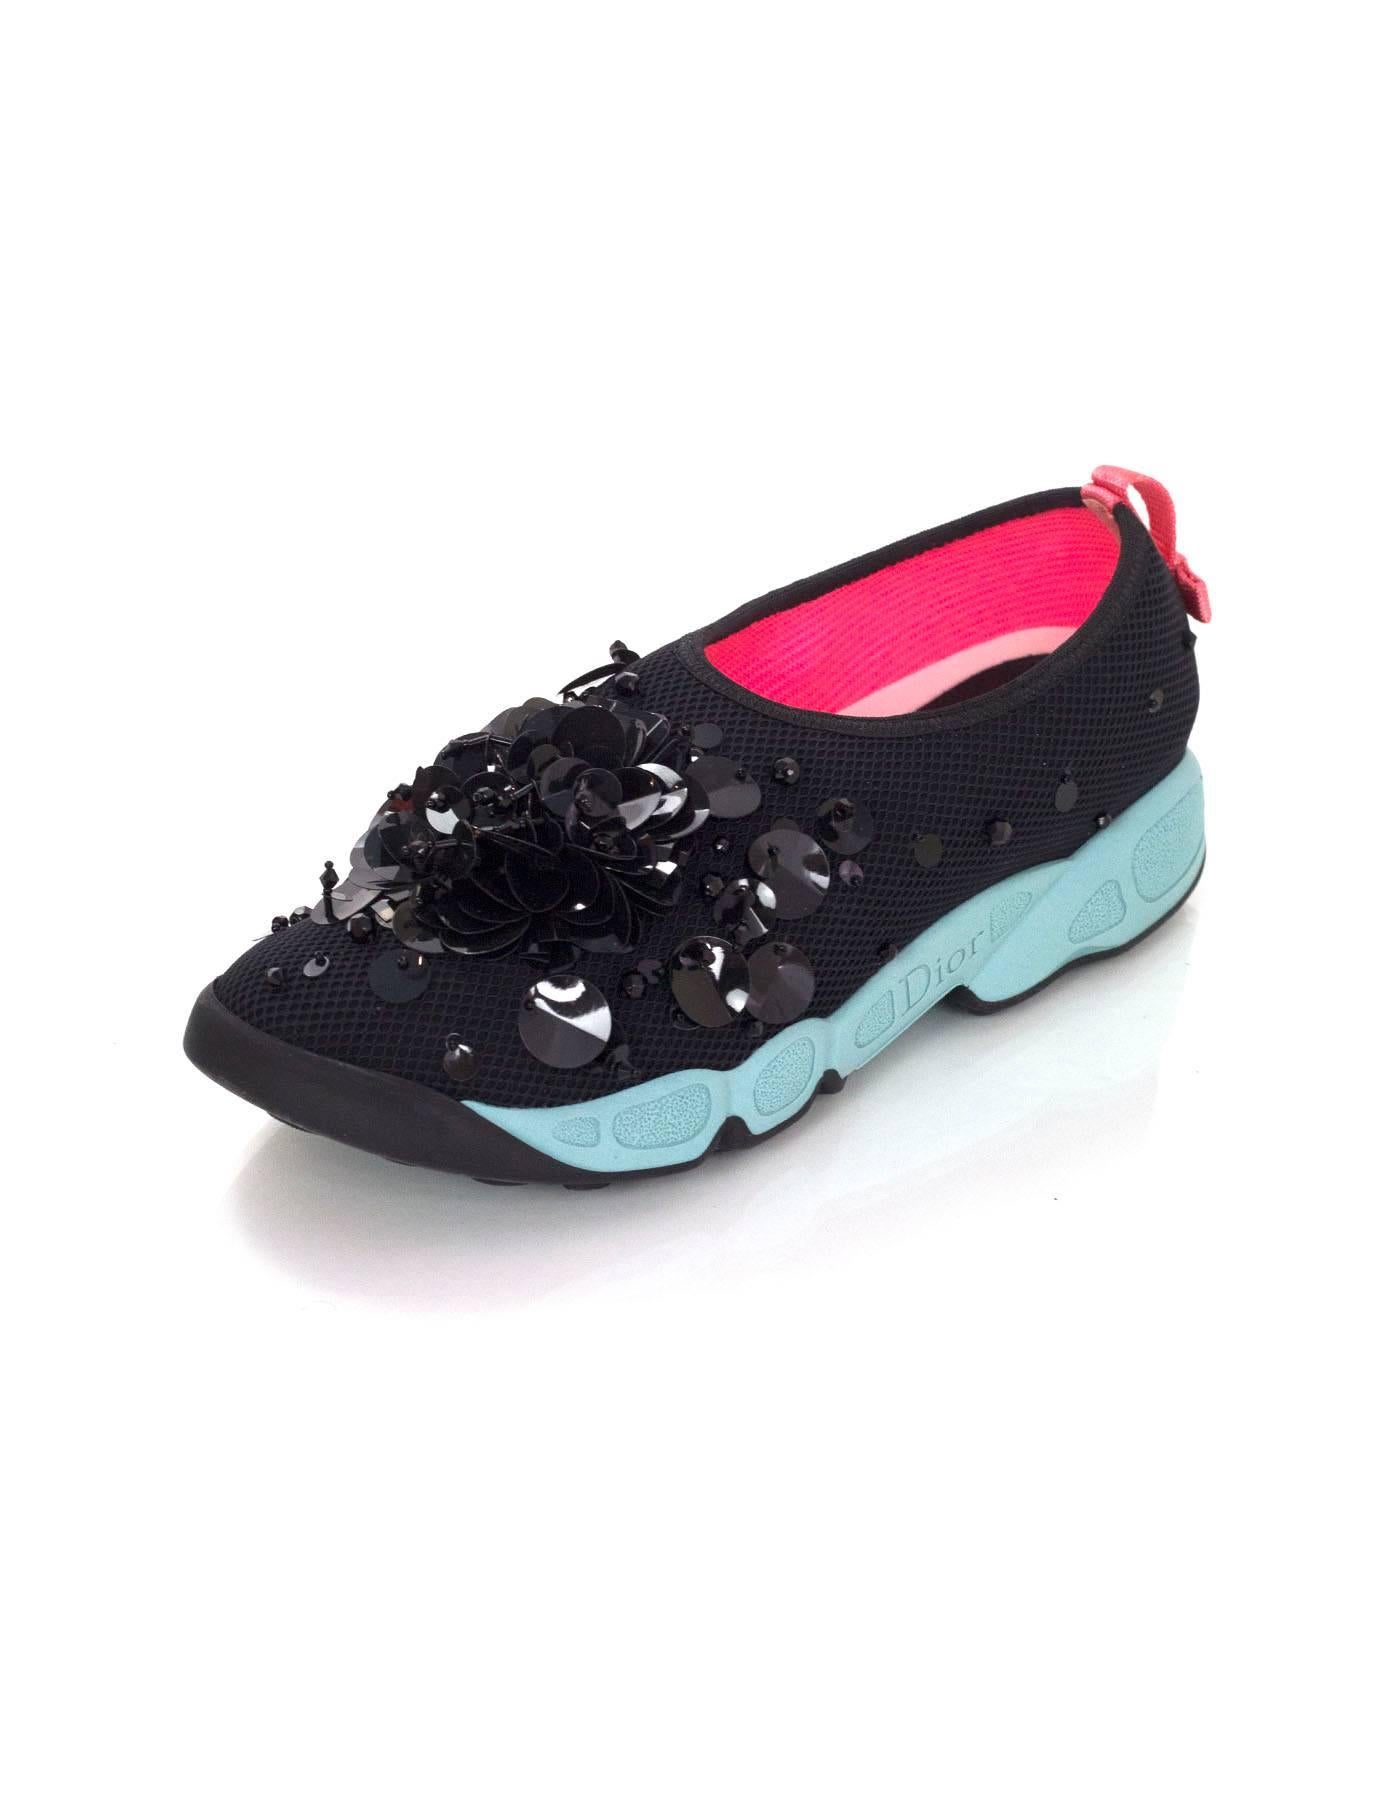 Christian Dior Black and Blue Beaded Fusion Sneakers Sz 38.5
Features beading and sequin throughout

Made In: Italy
Color: Black, blue
Materials: Nylon/mesh blend, beads, rubber
Closure/Opening: Slide on
Sole Stamp: Dior Made in Italy 38.5
Overall